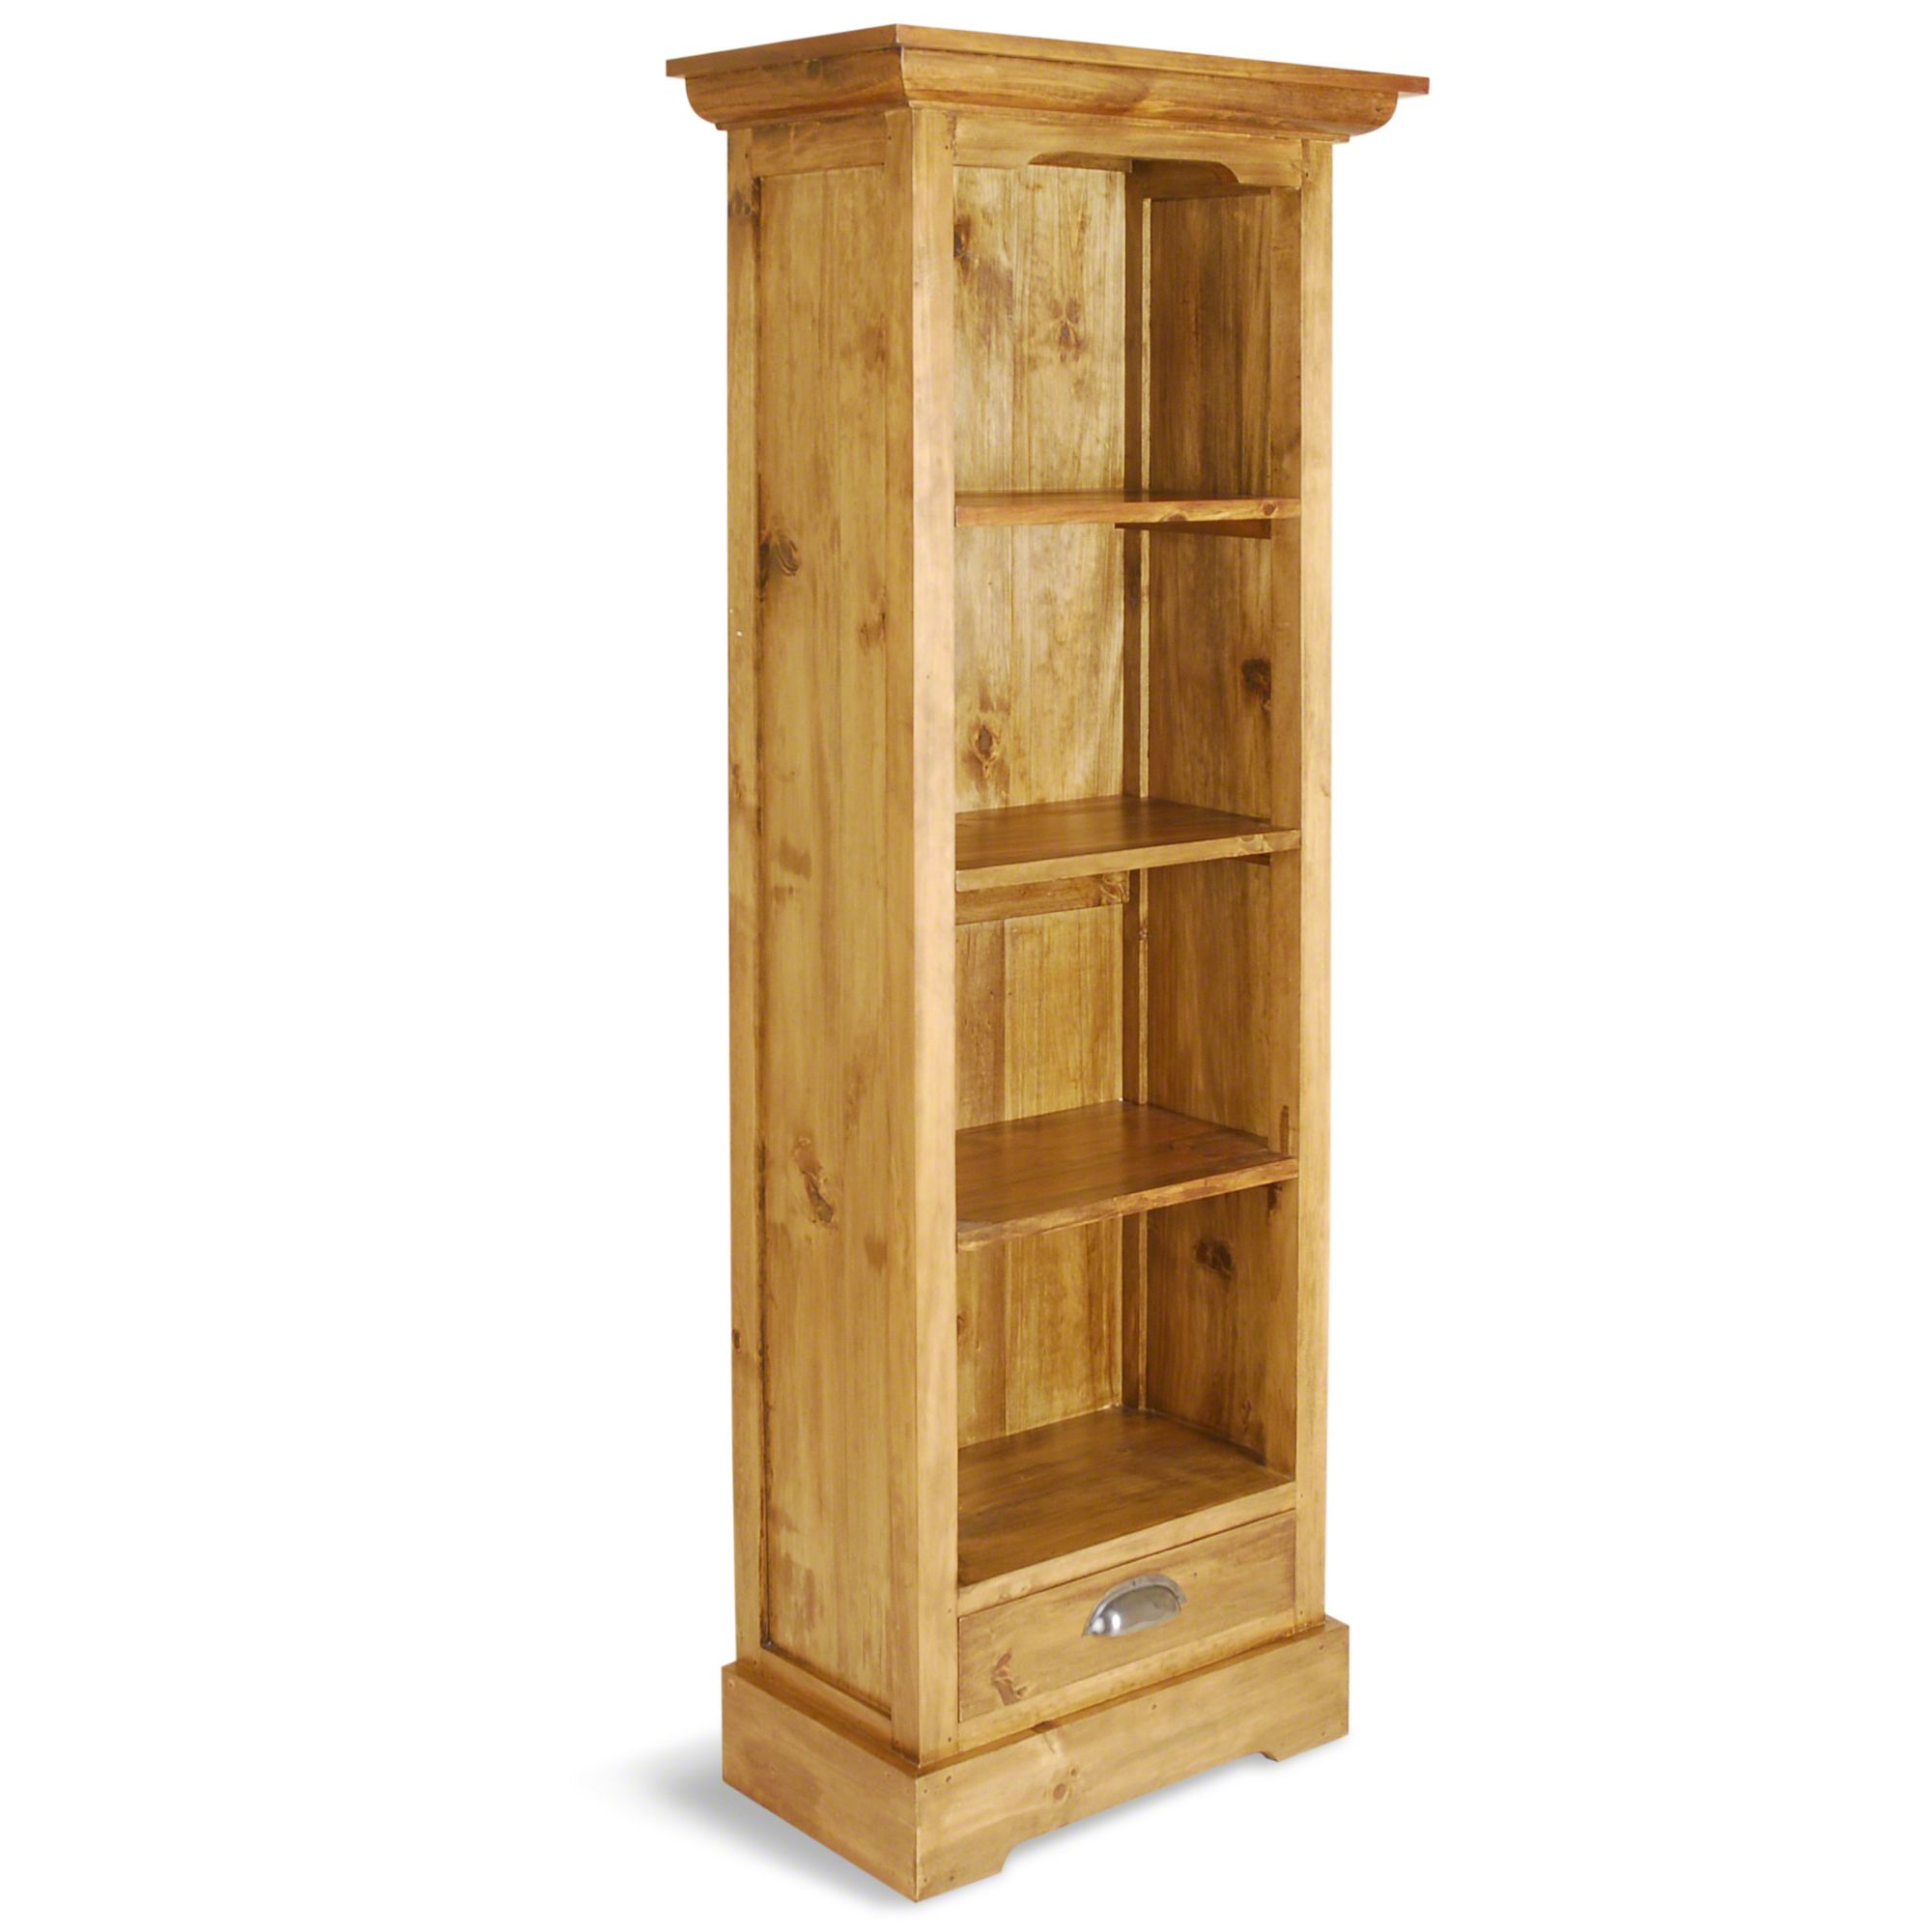 Oceans Apart Vintage Pine Bookcase with Drawer at Tesco Direct